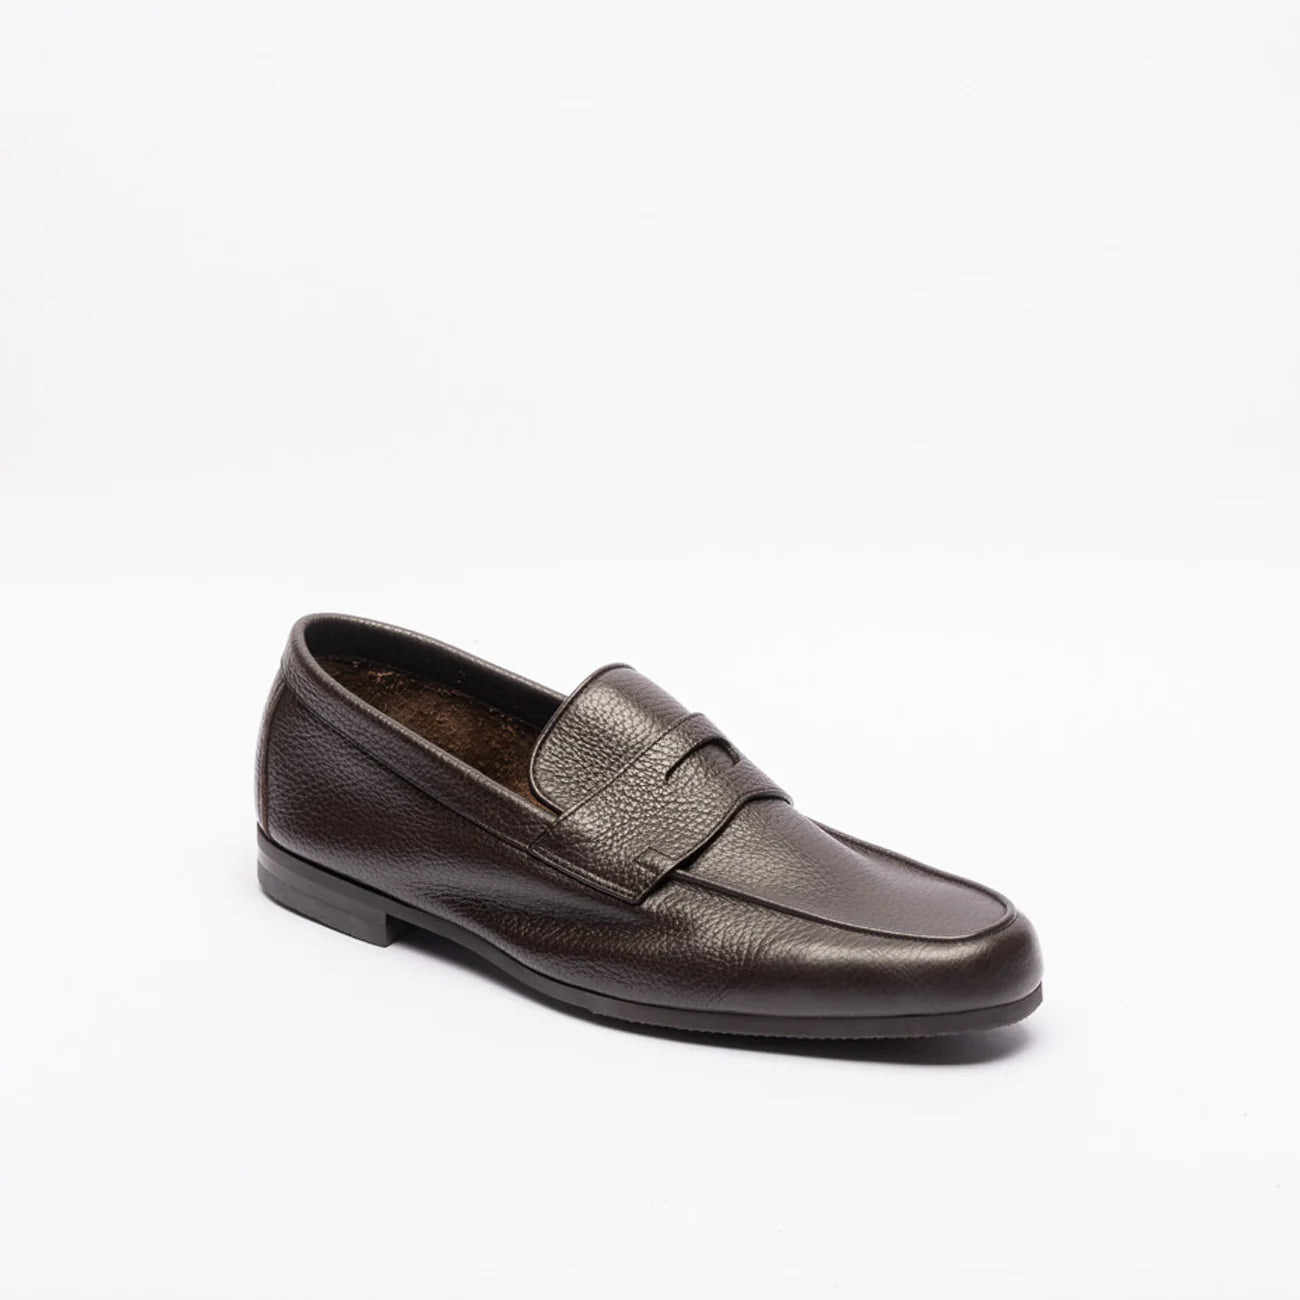 John Lobb Thorne unflined penny loafer in brown hammered leather